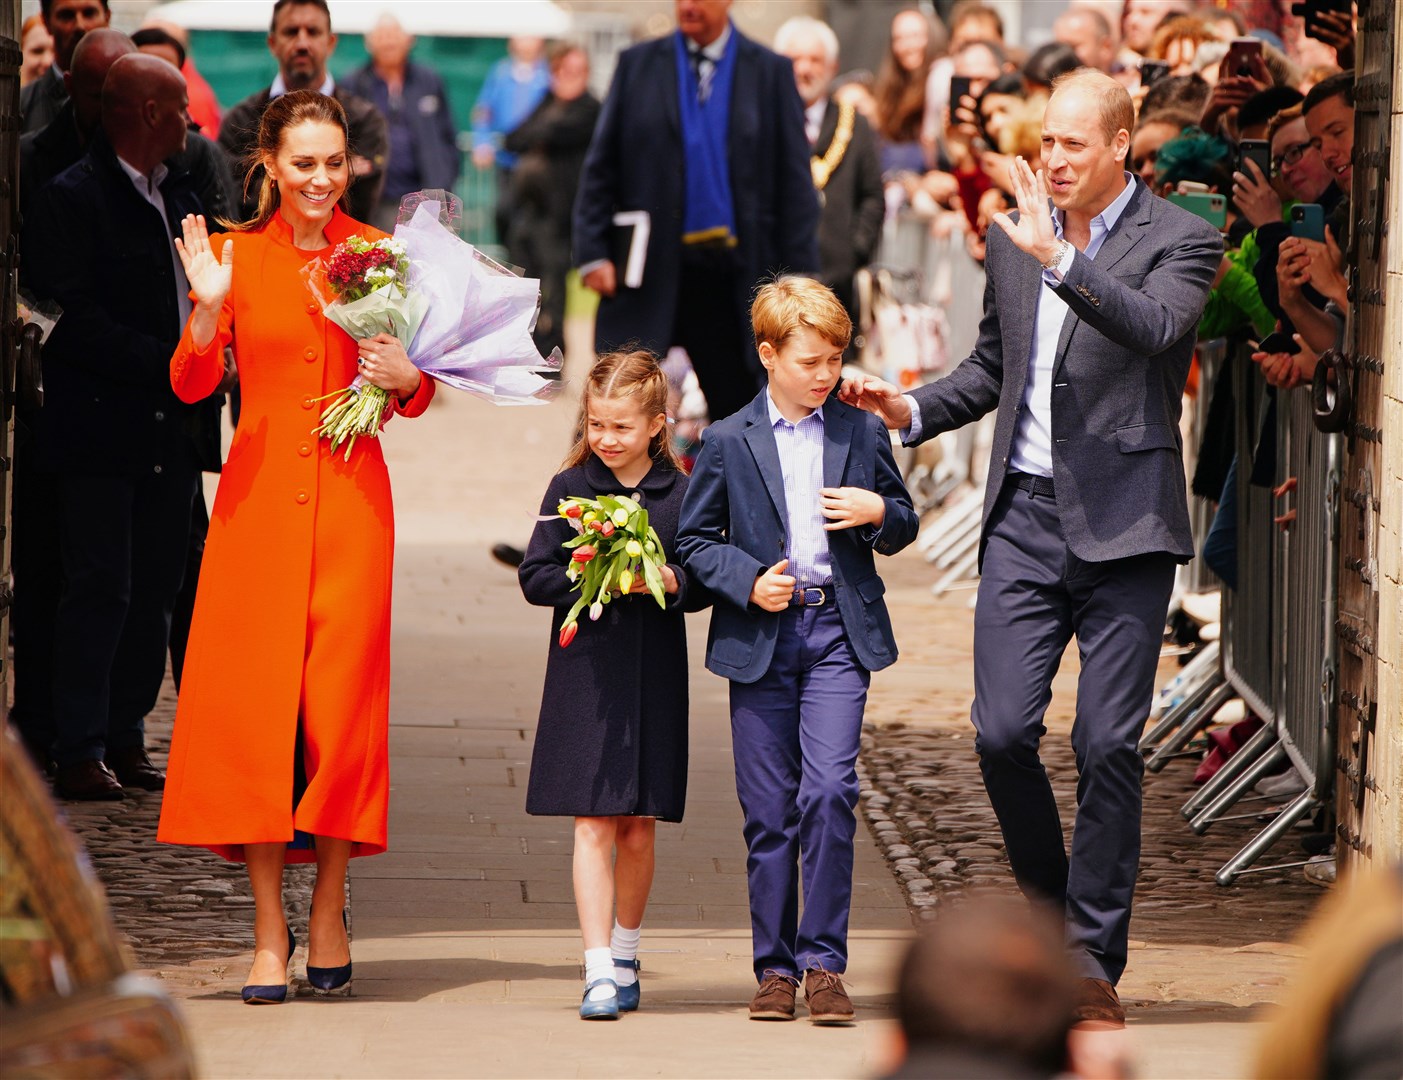 Well-wishers spoke of their joy at meeting the royal family (Ashley Crowden/PA)